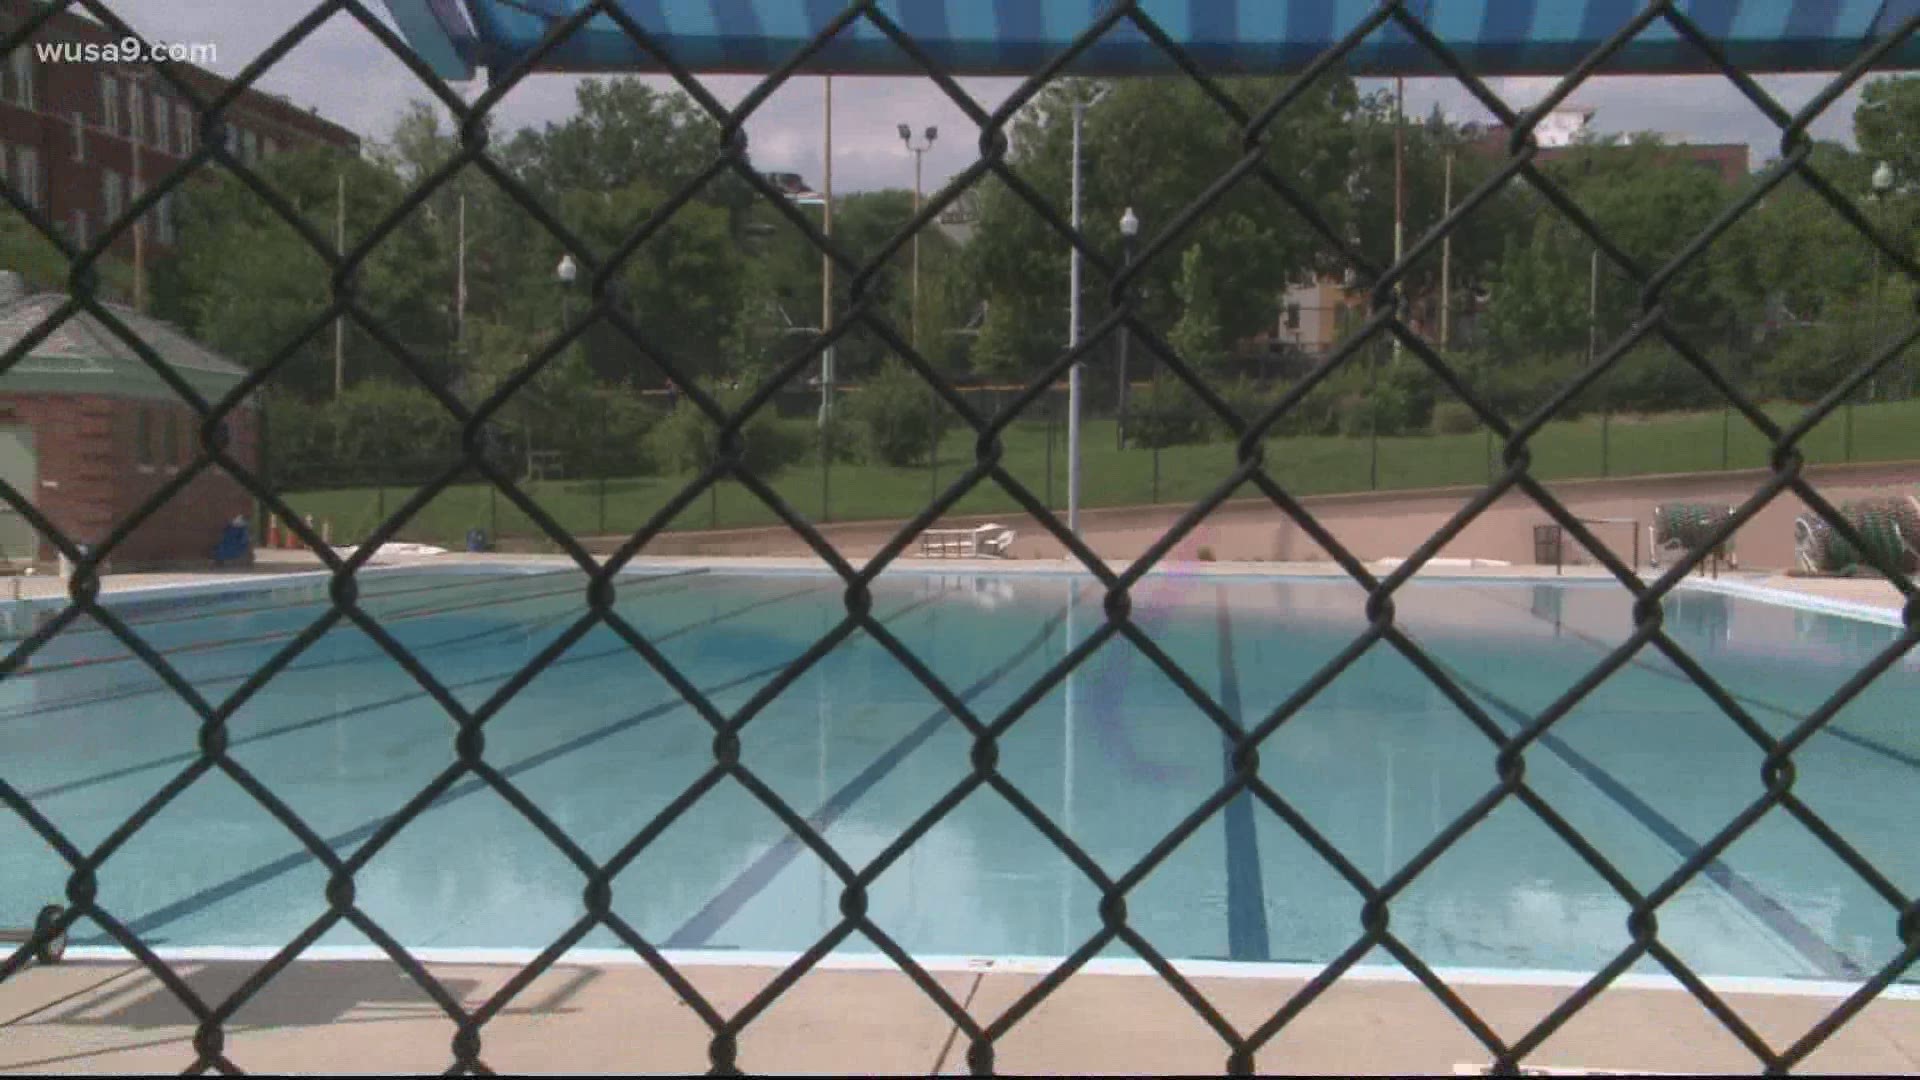 Mayor Bowser announced her decision to keep pools closed citing health precautions as the District continues to manage coronavirus cases in the region.